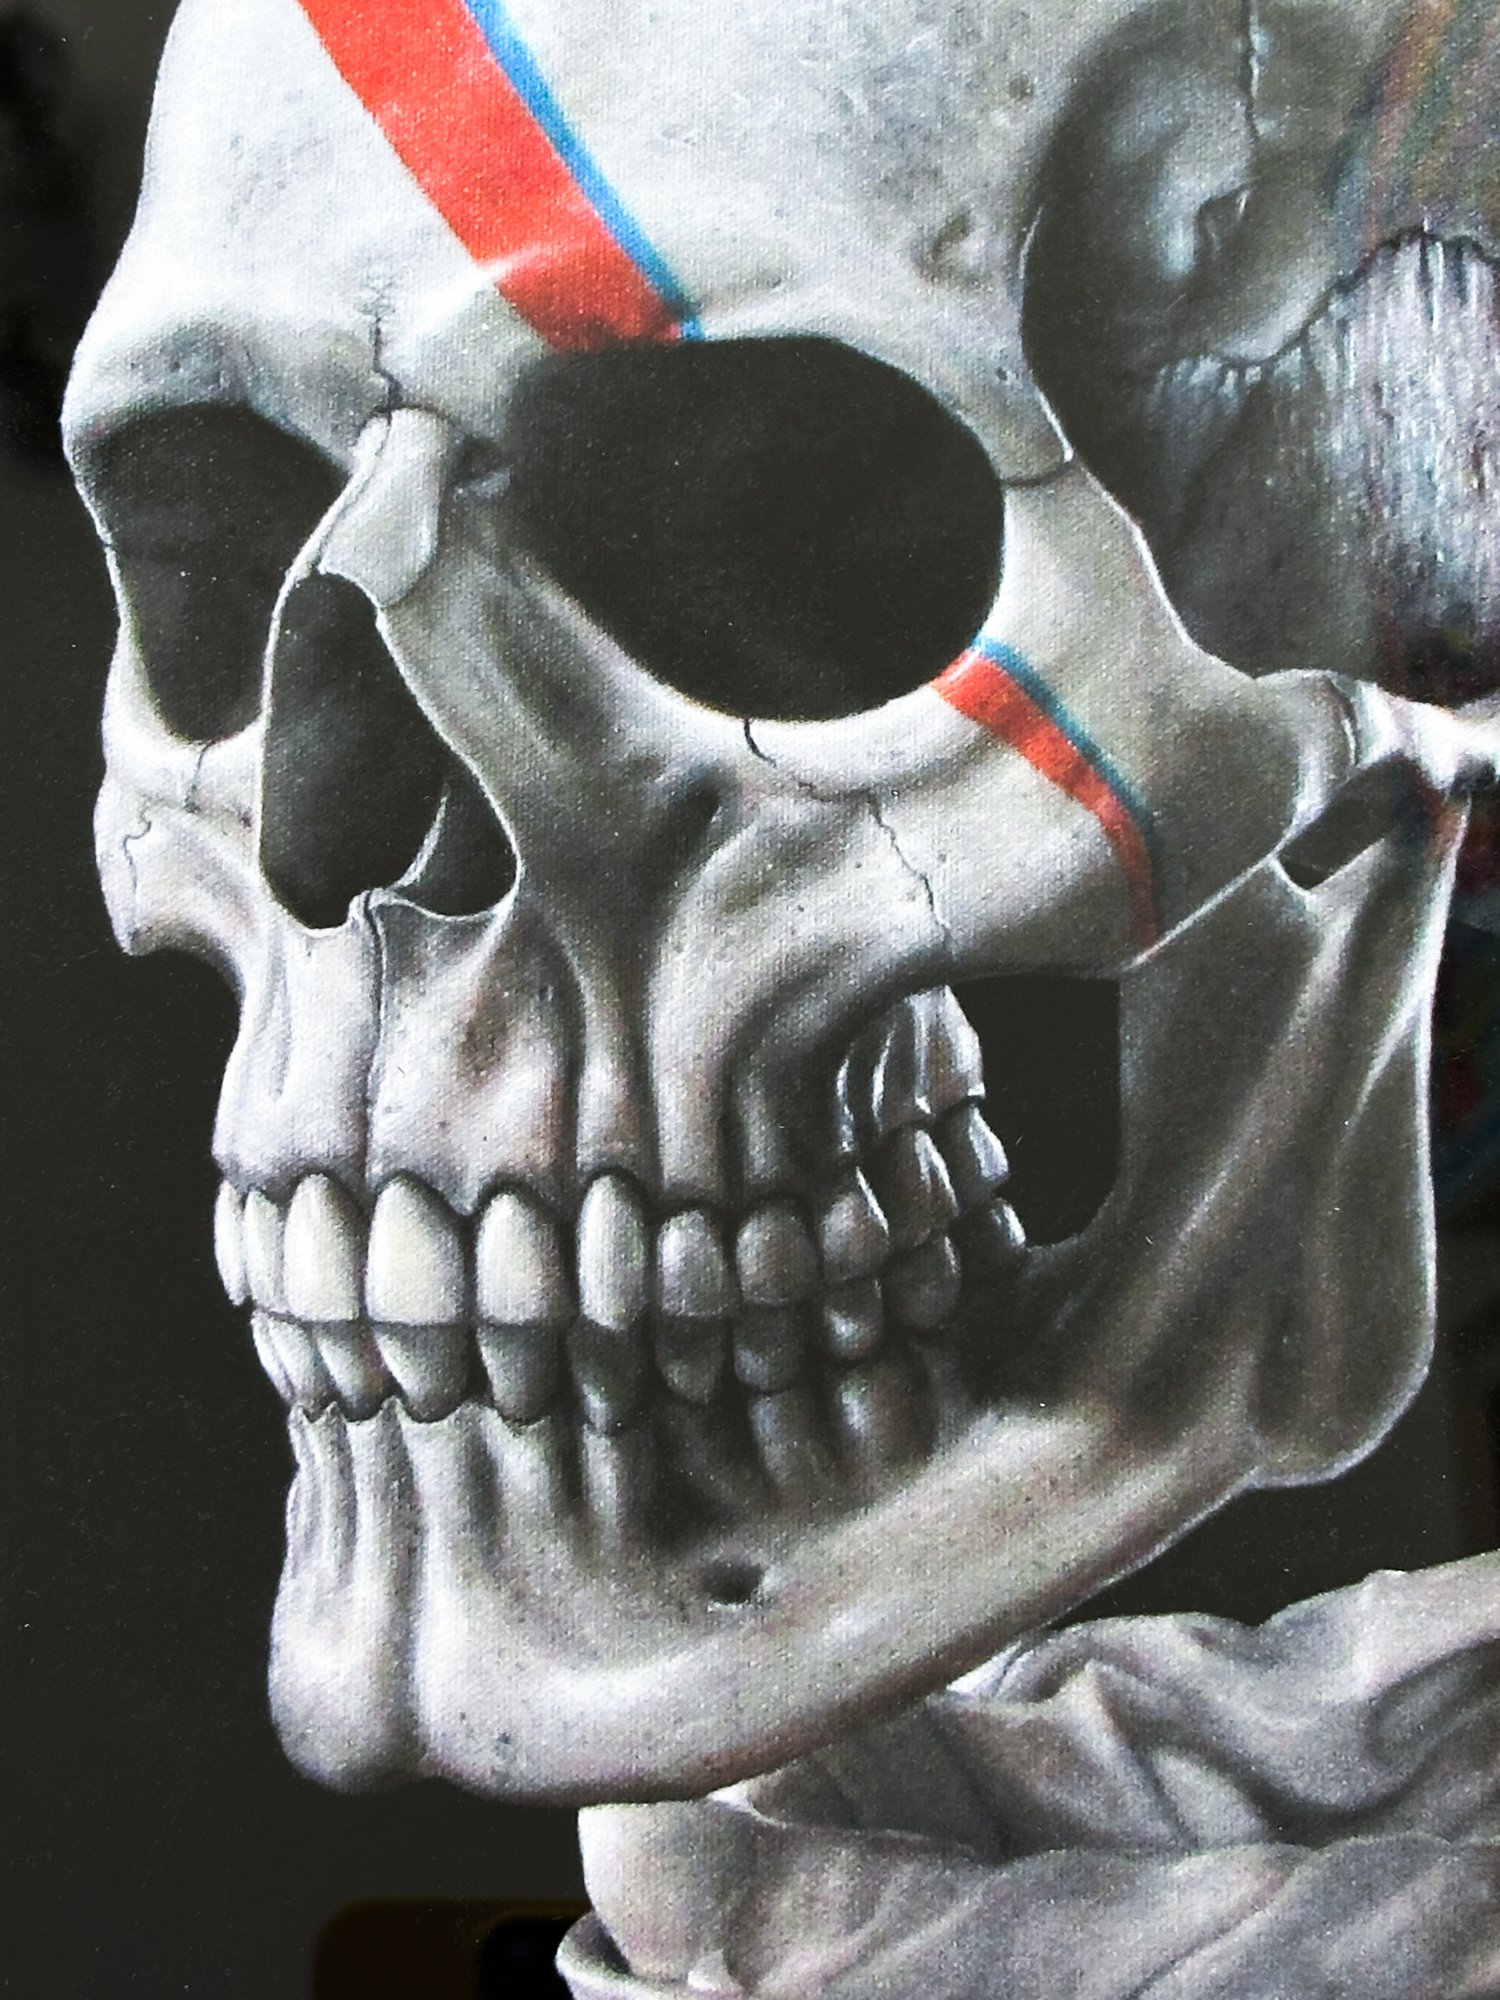 Image of 'Skull Study' by RONCH